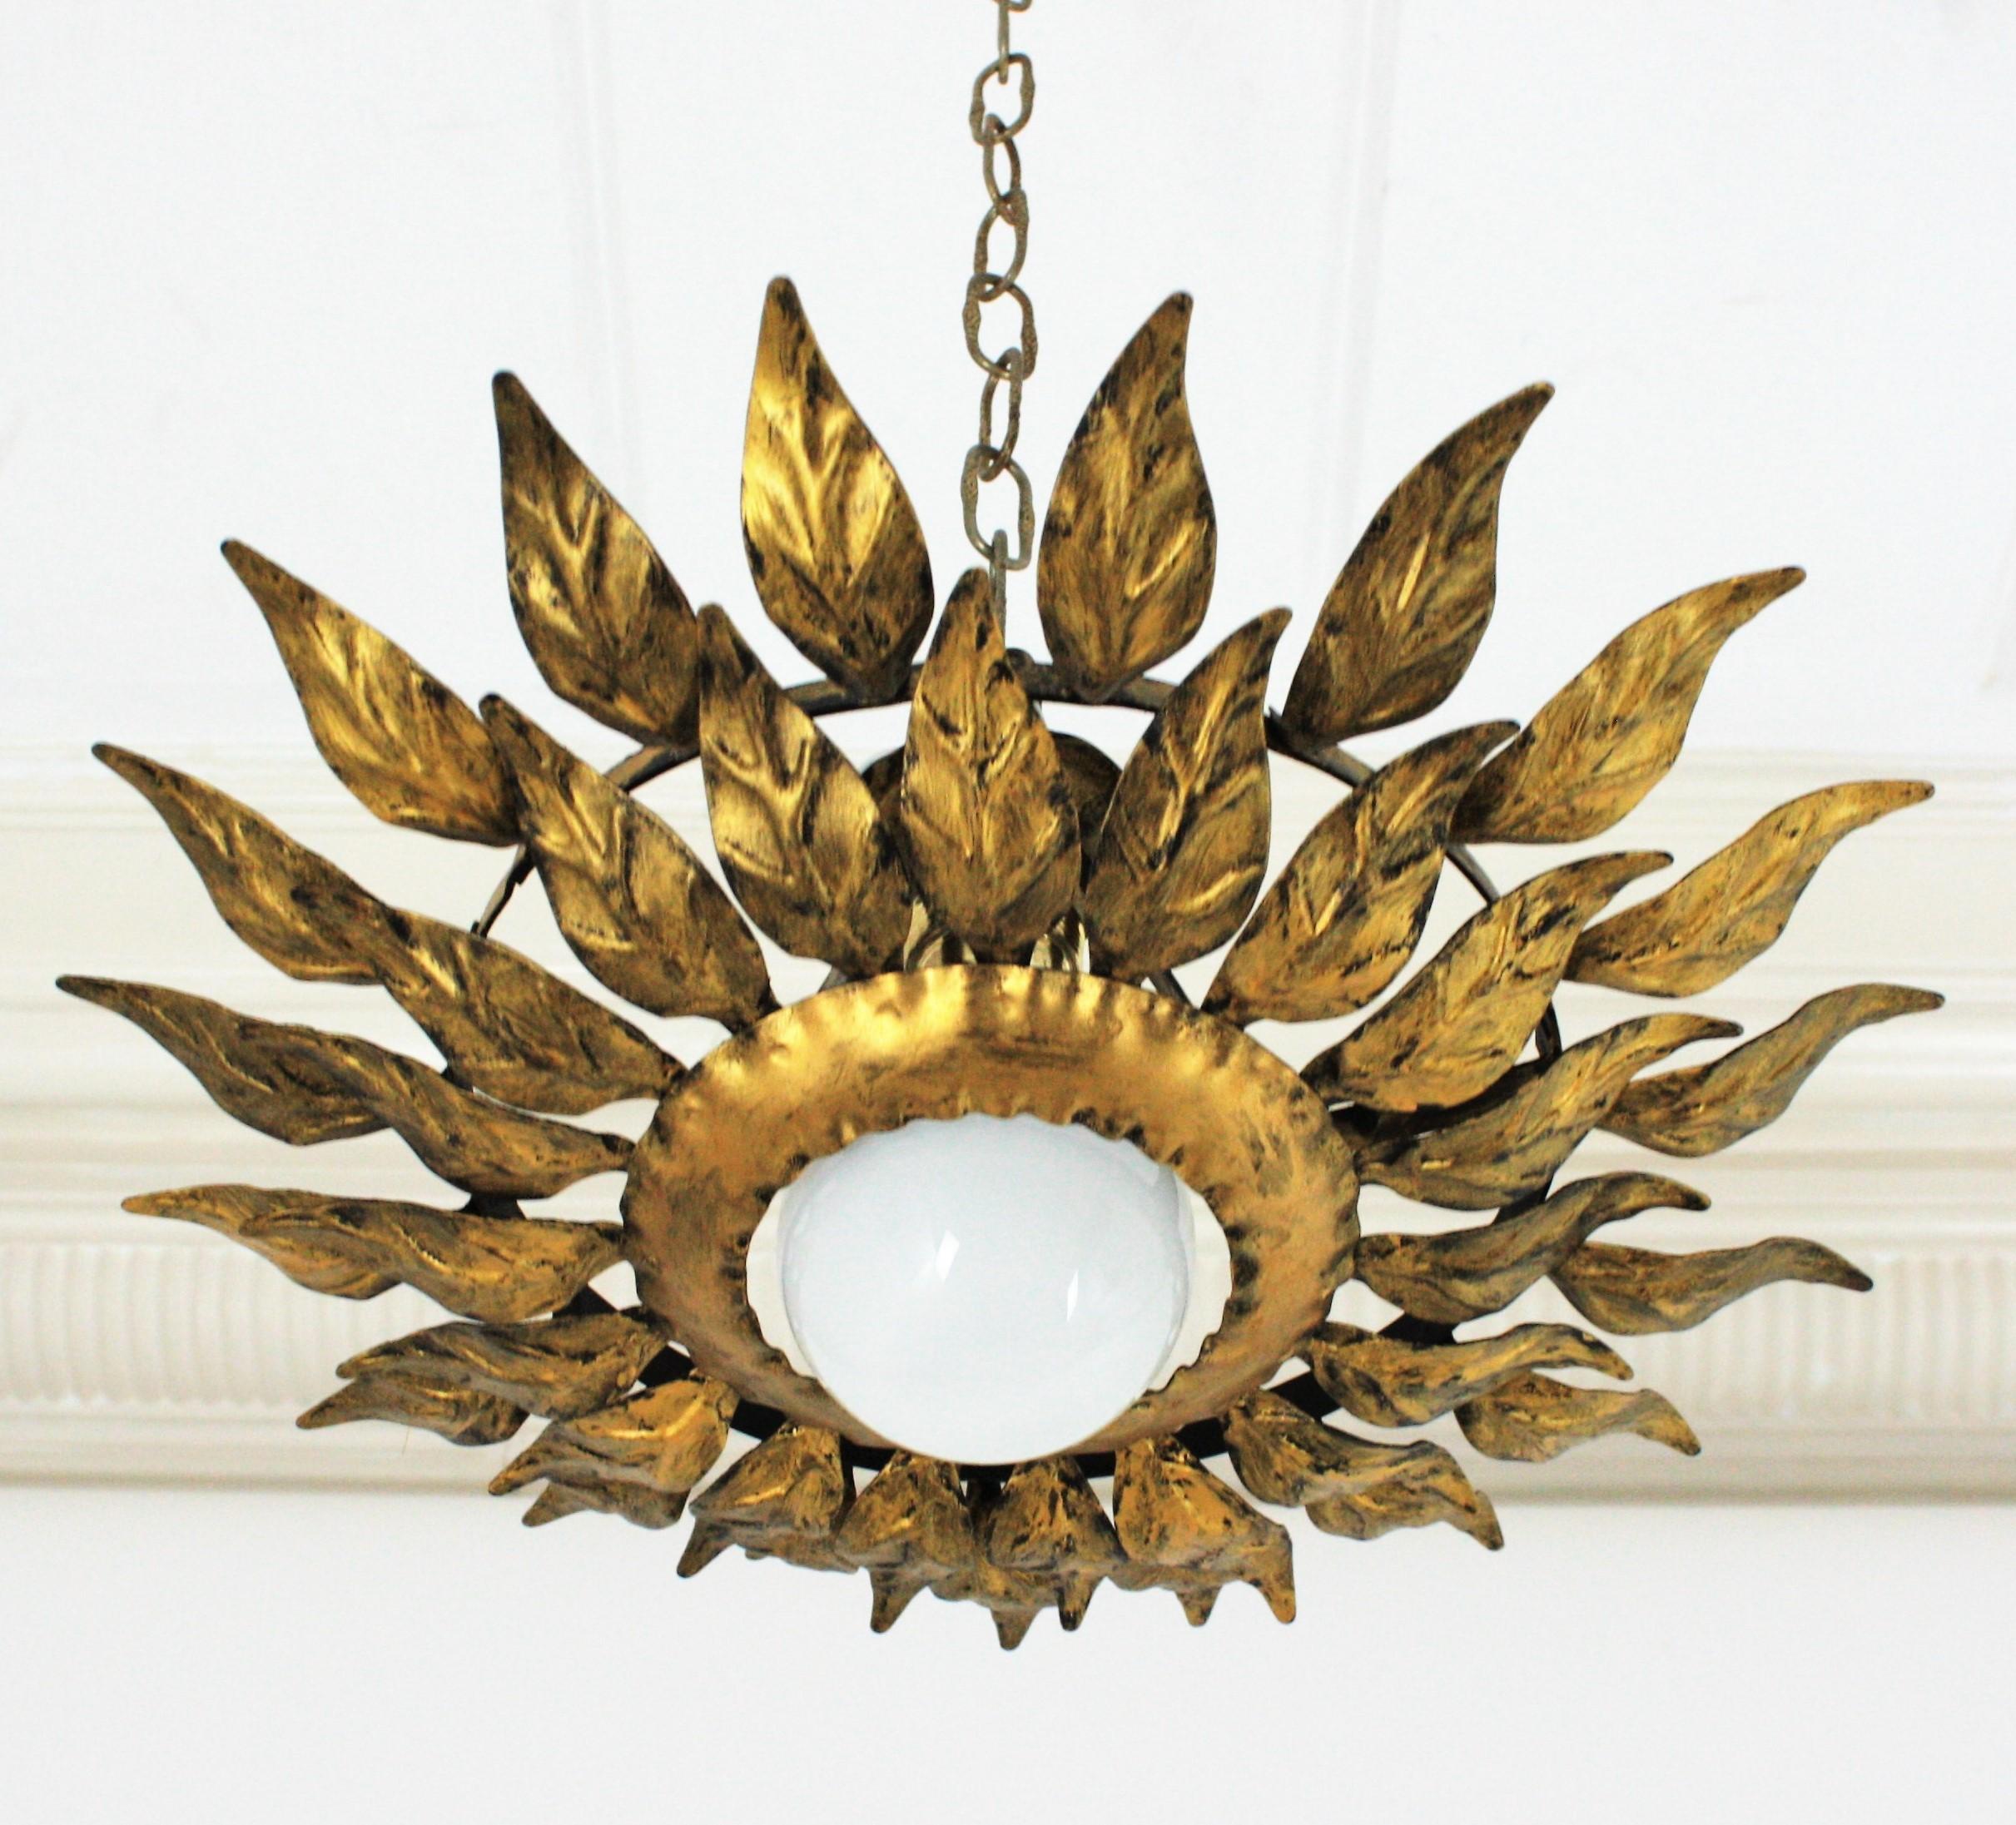 Gilt metal double layered leafed sunburst ceiling flush mount. Spain, 1960s.
An eye-catching sunburst or flower burst ceiling flush mount with two layers of gilded leaves surrounding a central exposed bulb.
It can be placed flush mounted or as a